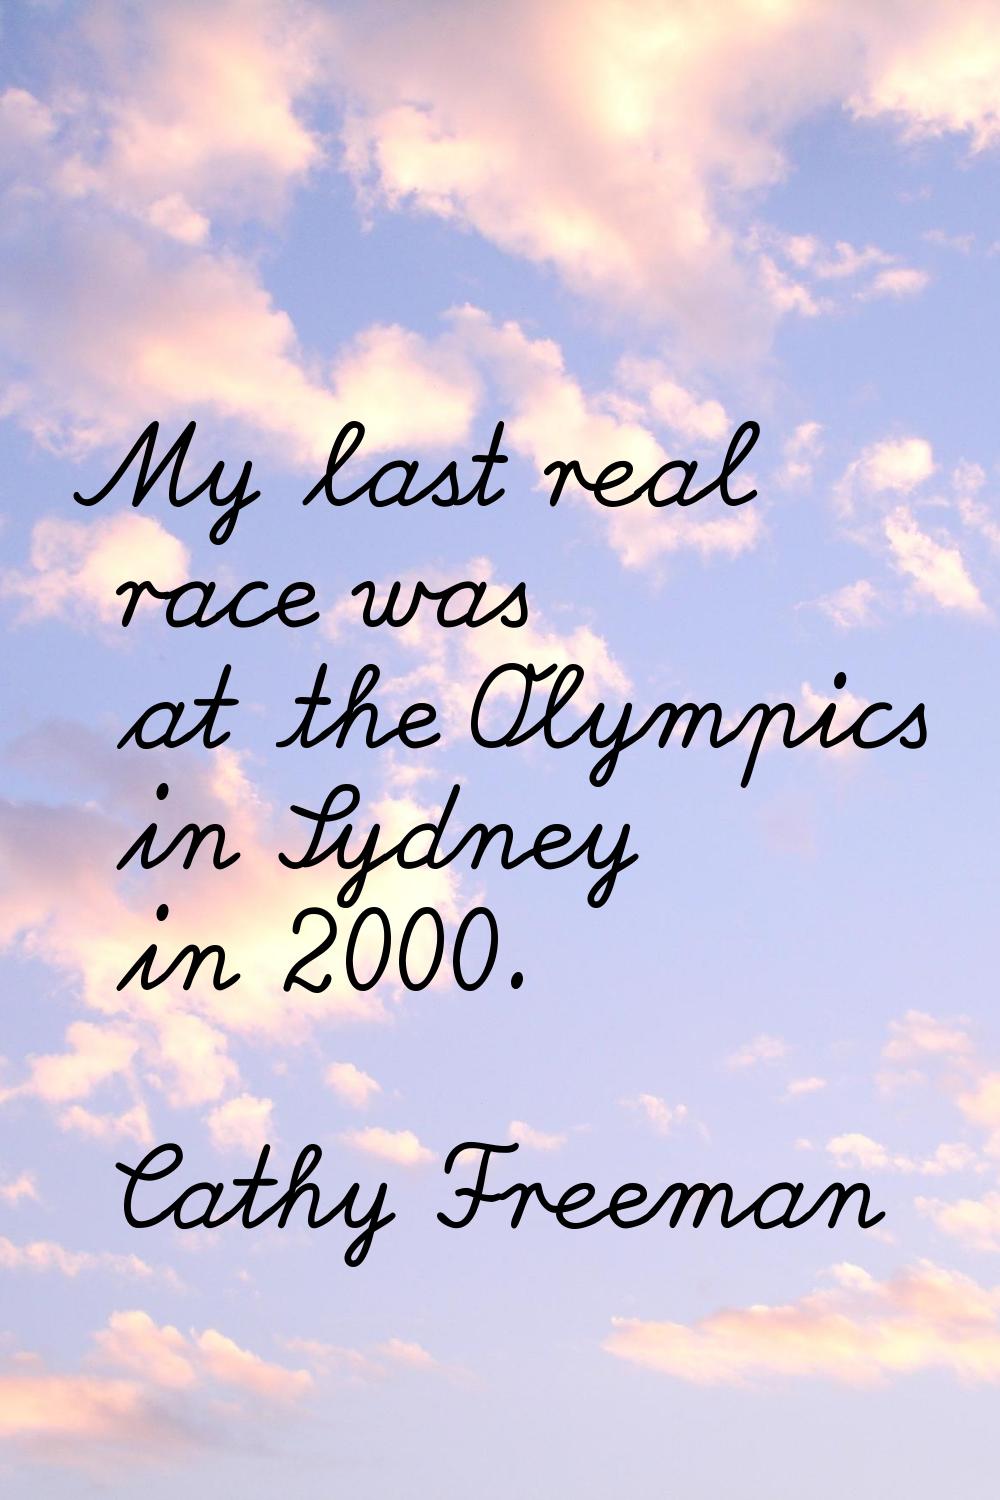 My last real race was at the Olympics in Sydney in 2000.